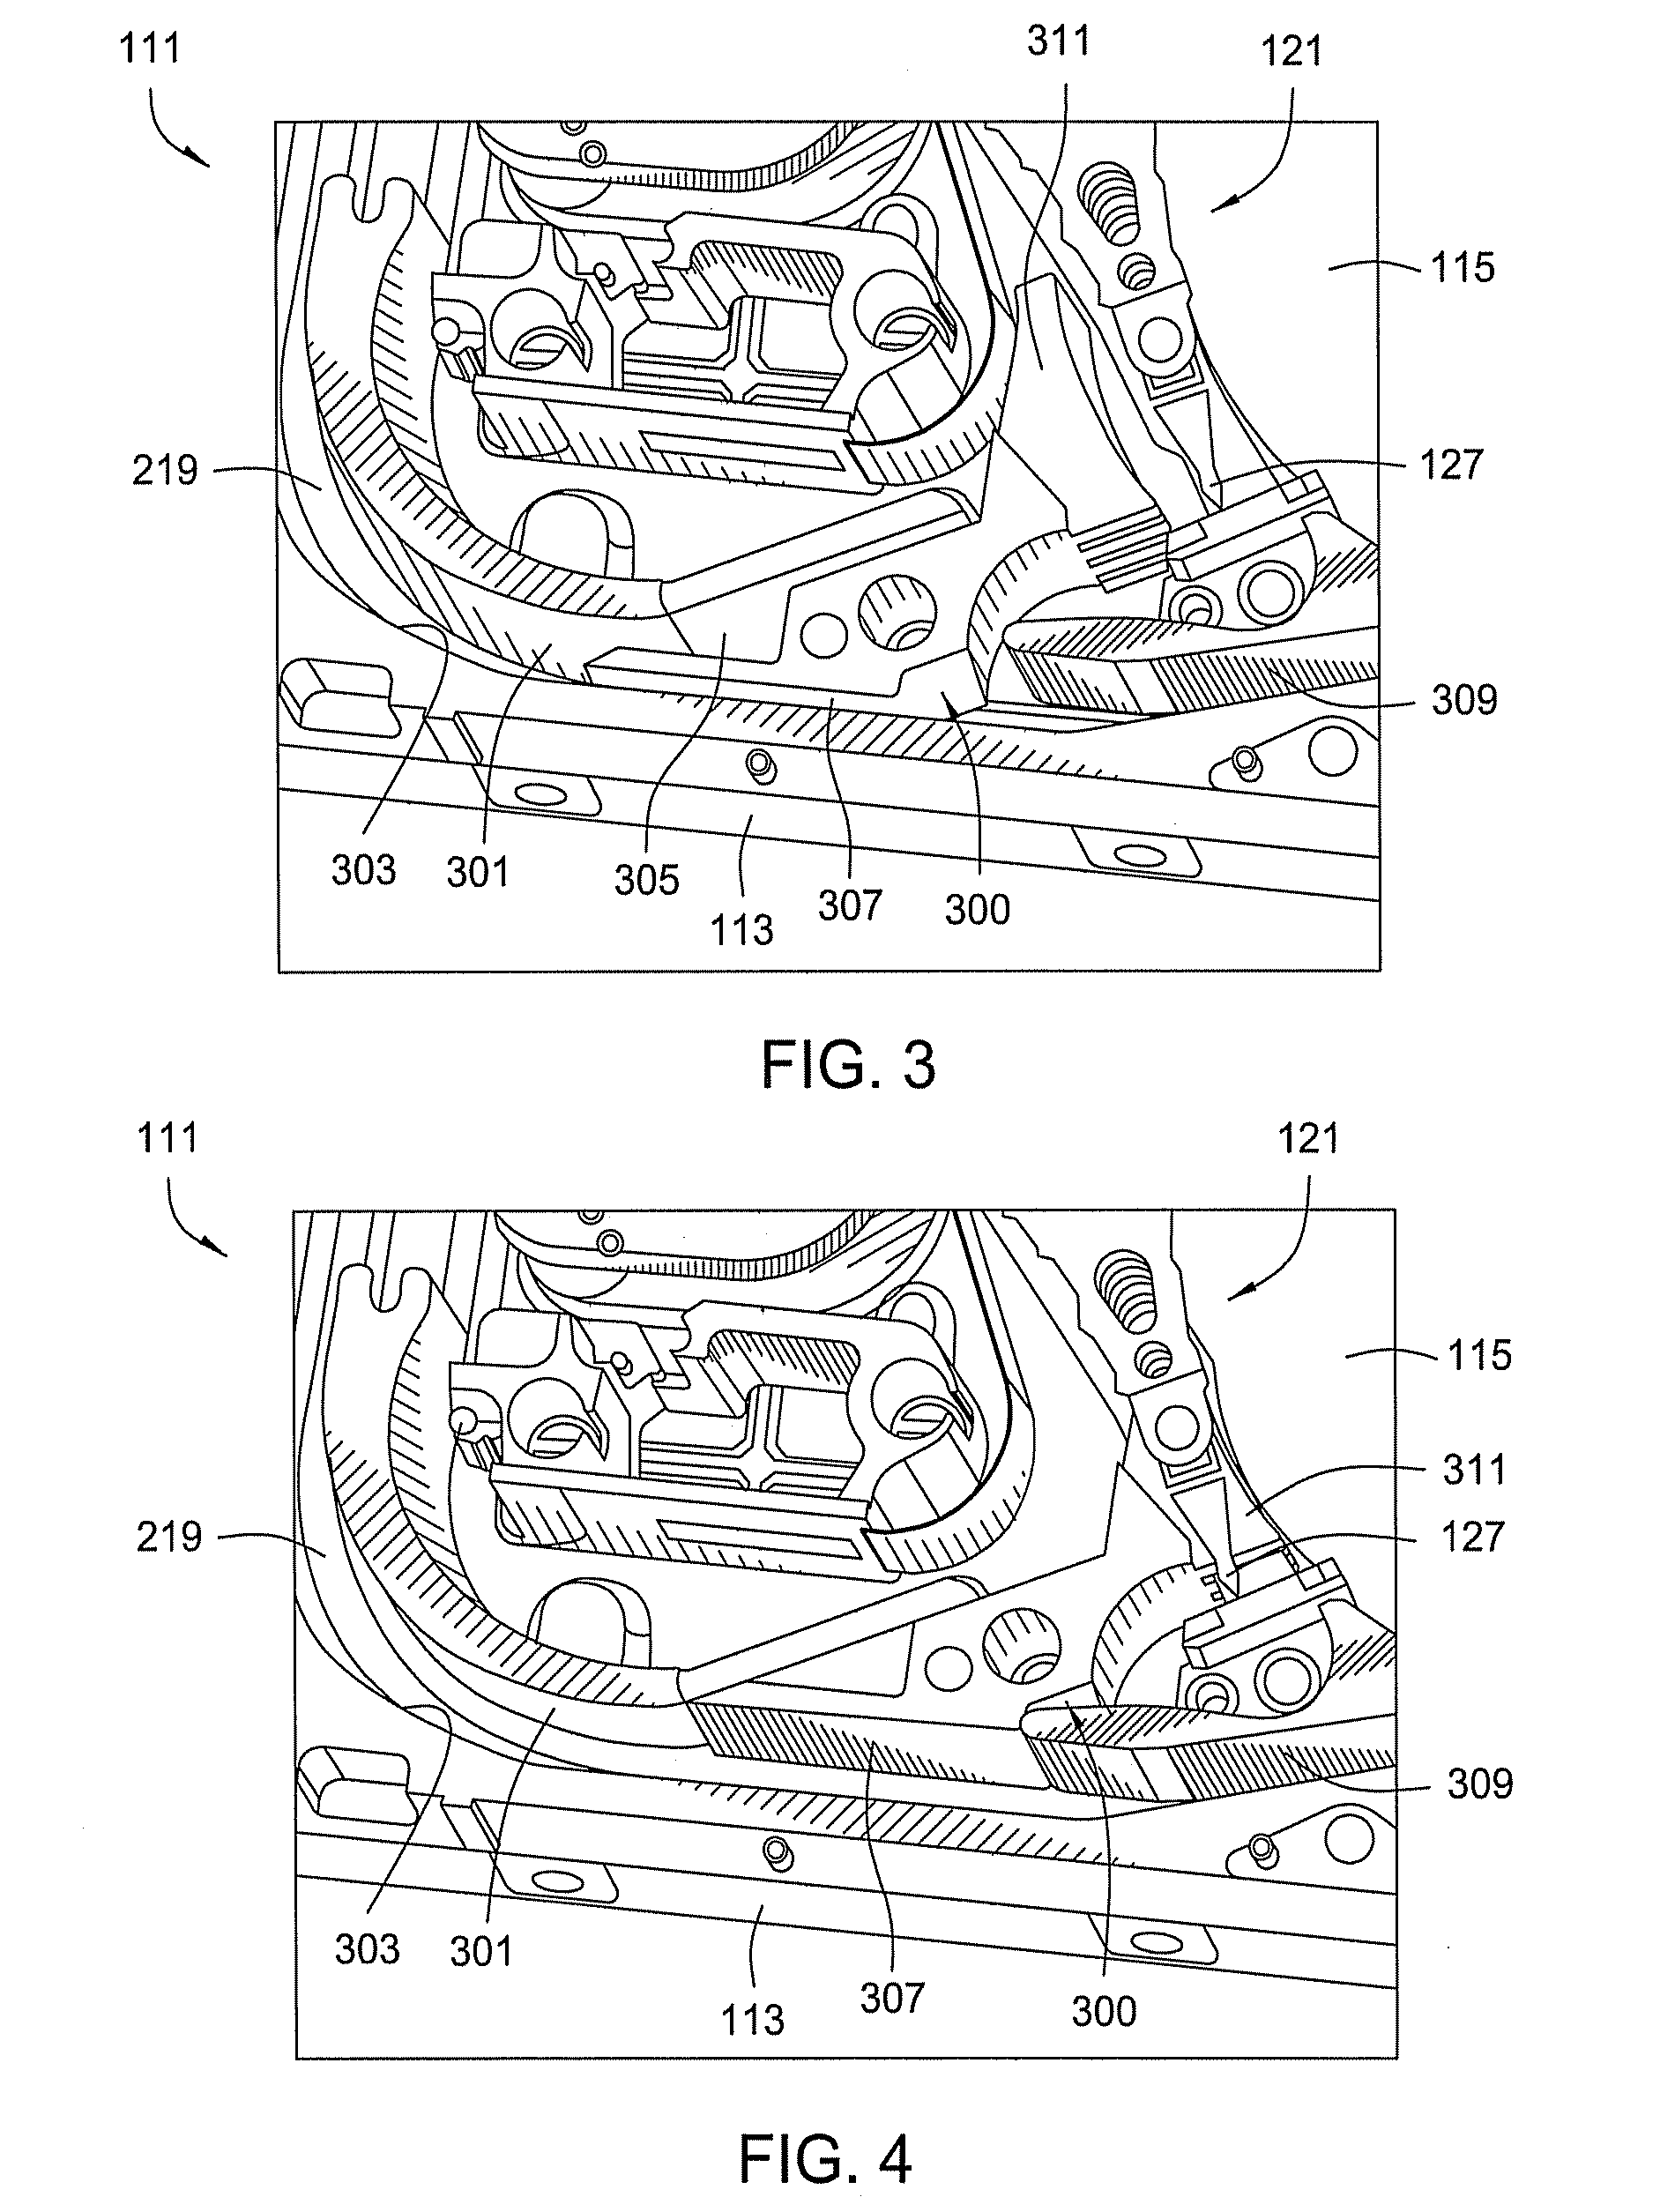 System, method, and apparatus for slit shroud with integrated bypass channel wall feature for disk drive applications